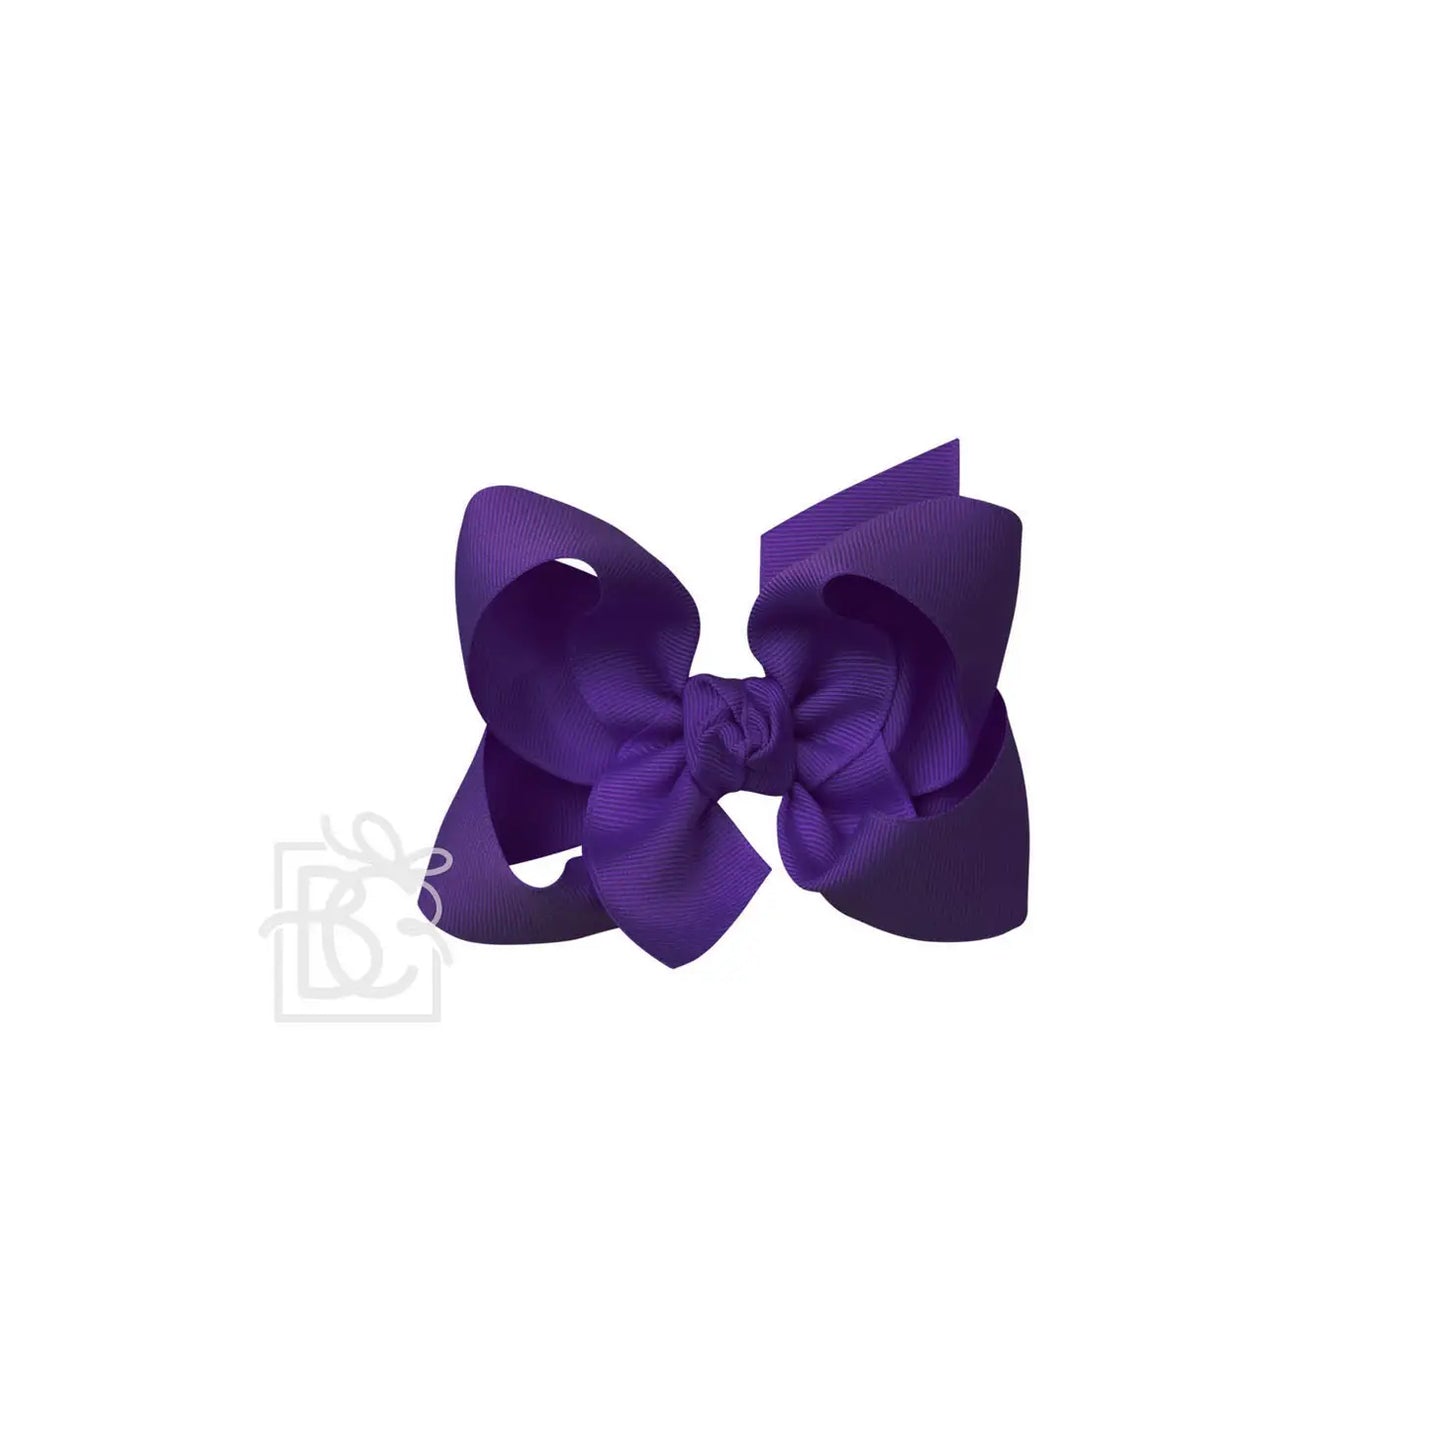 Large Bow in Purple  - Doodlebug's Children's Boutique